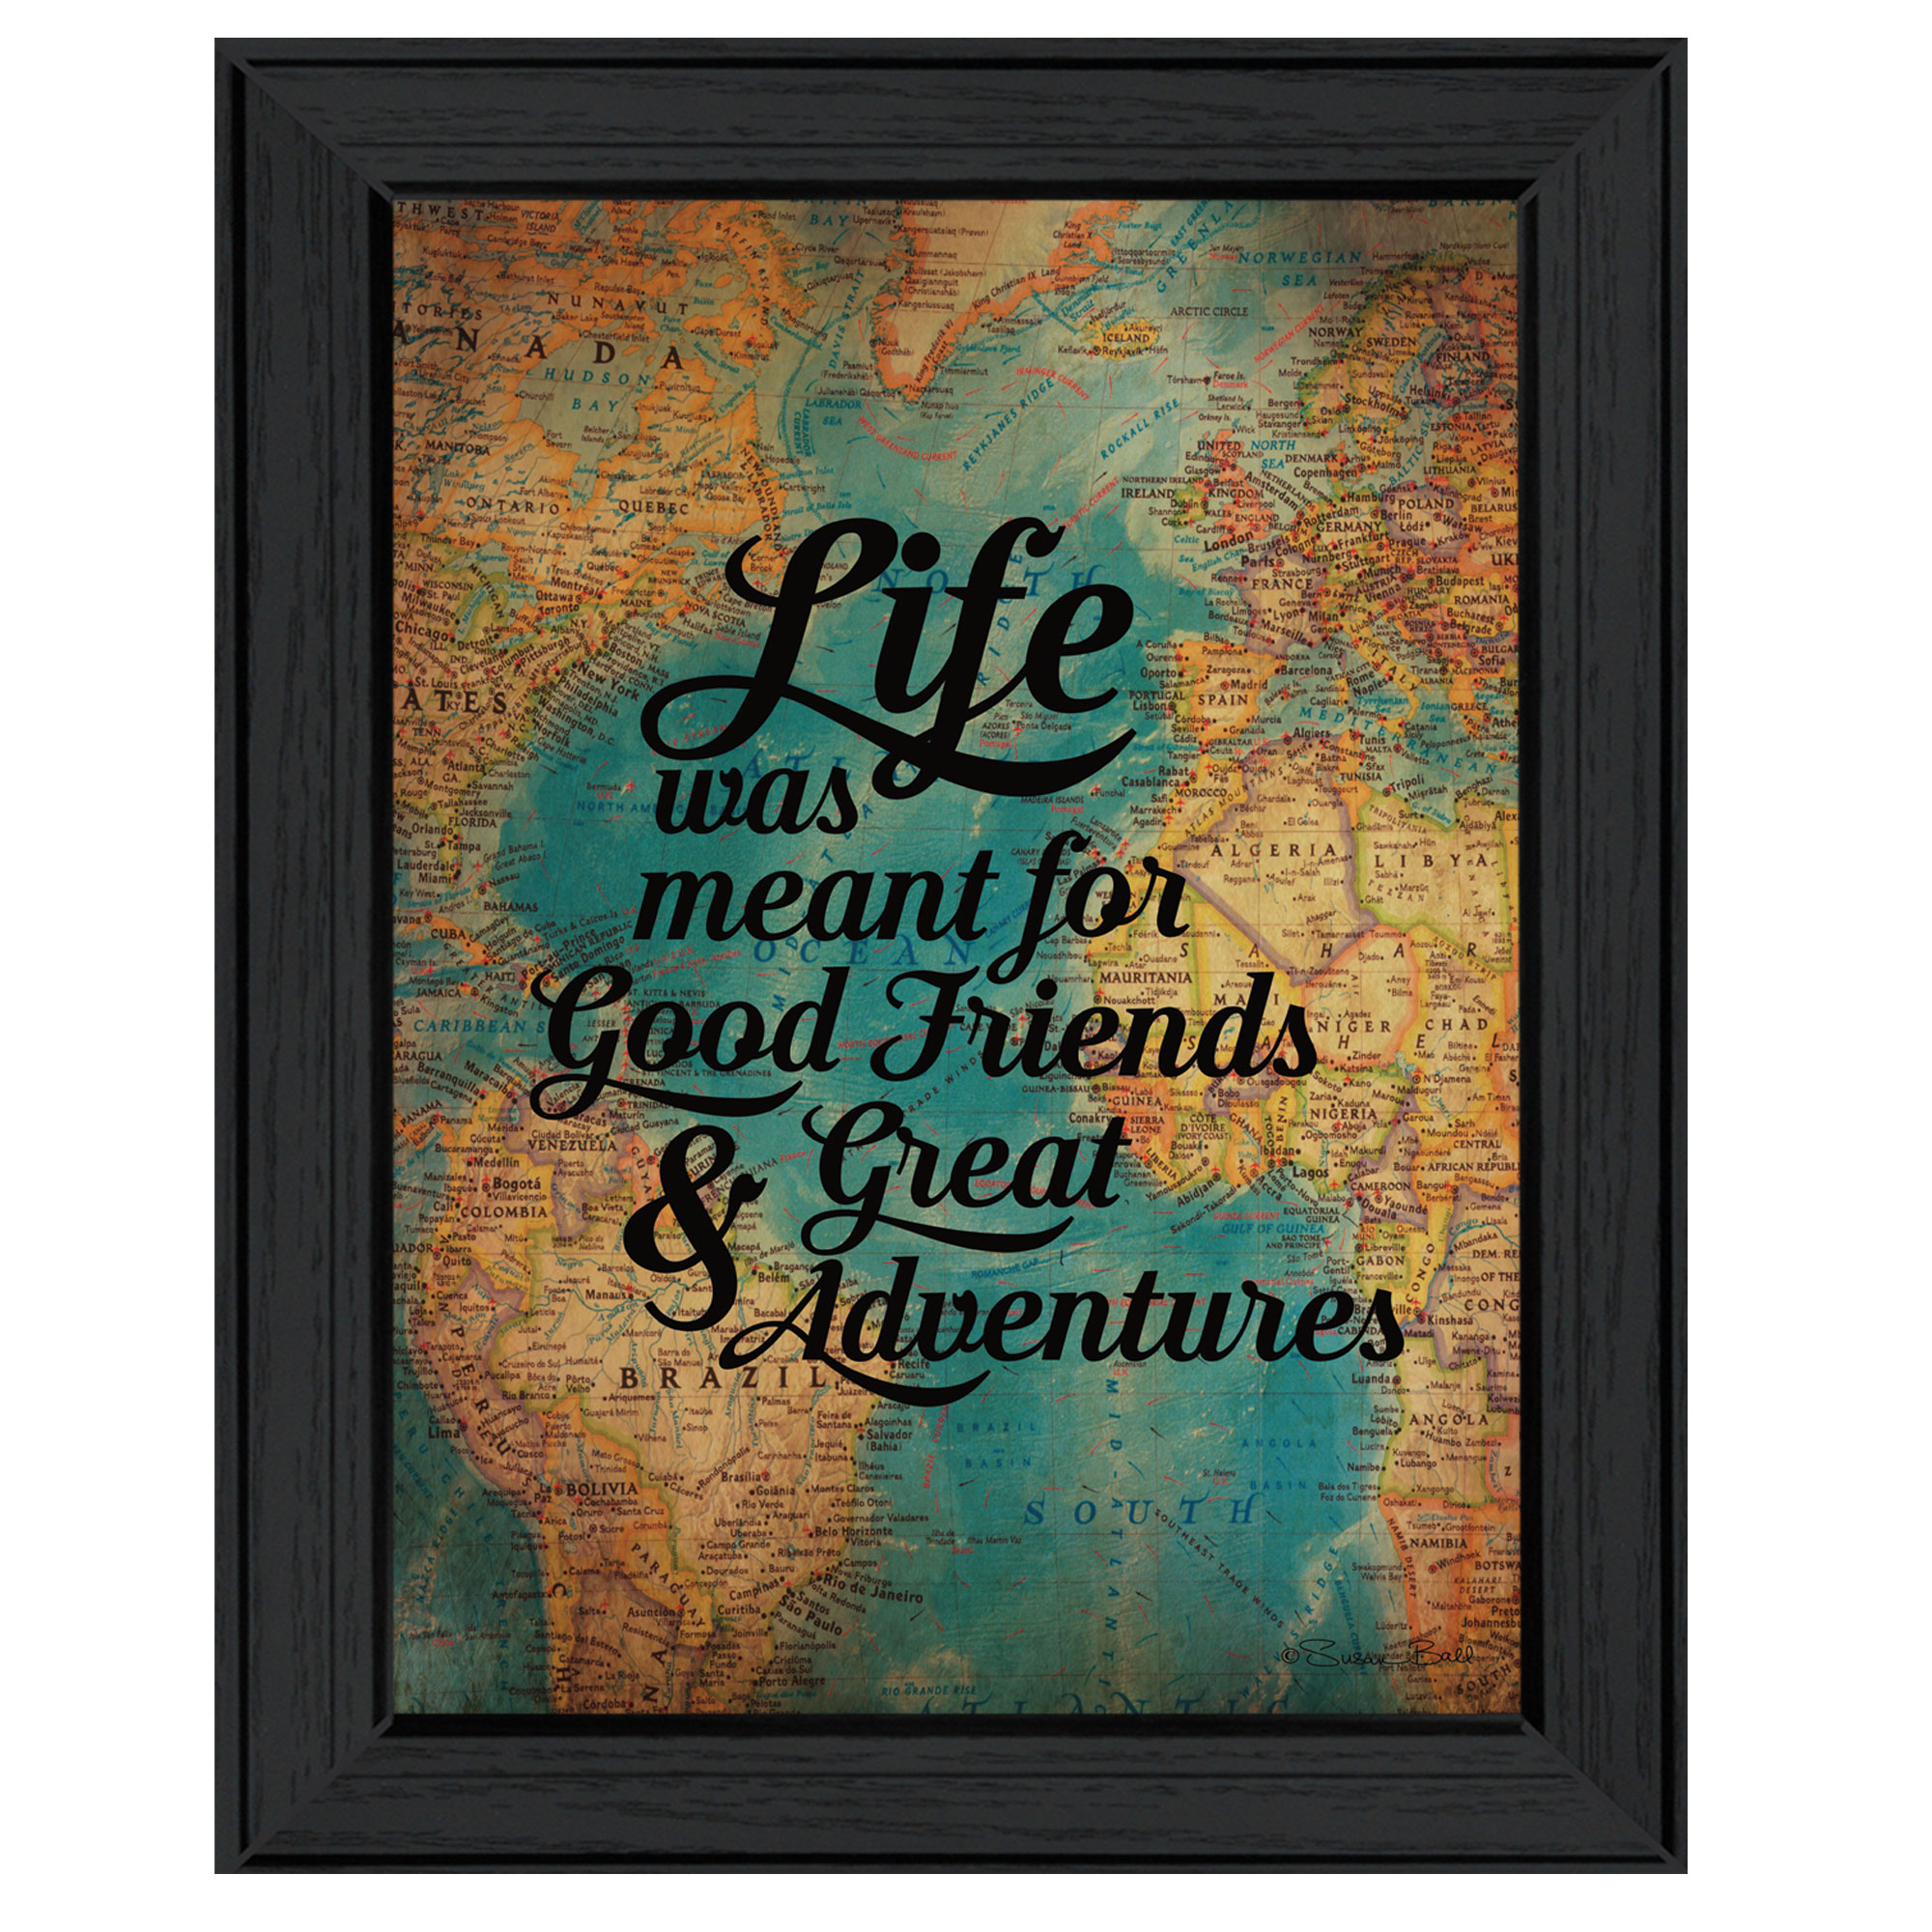 "Good Friends" By Susan Ball, Printed Wall Art, Ready To Hang Framed Poster, Black Frame